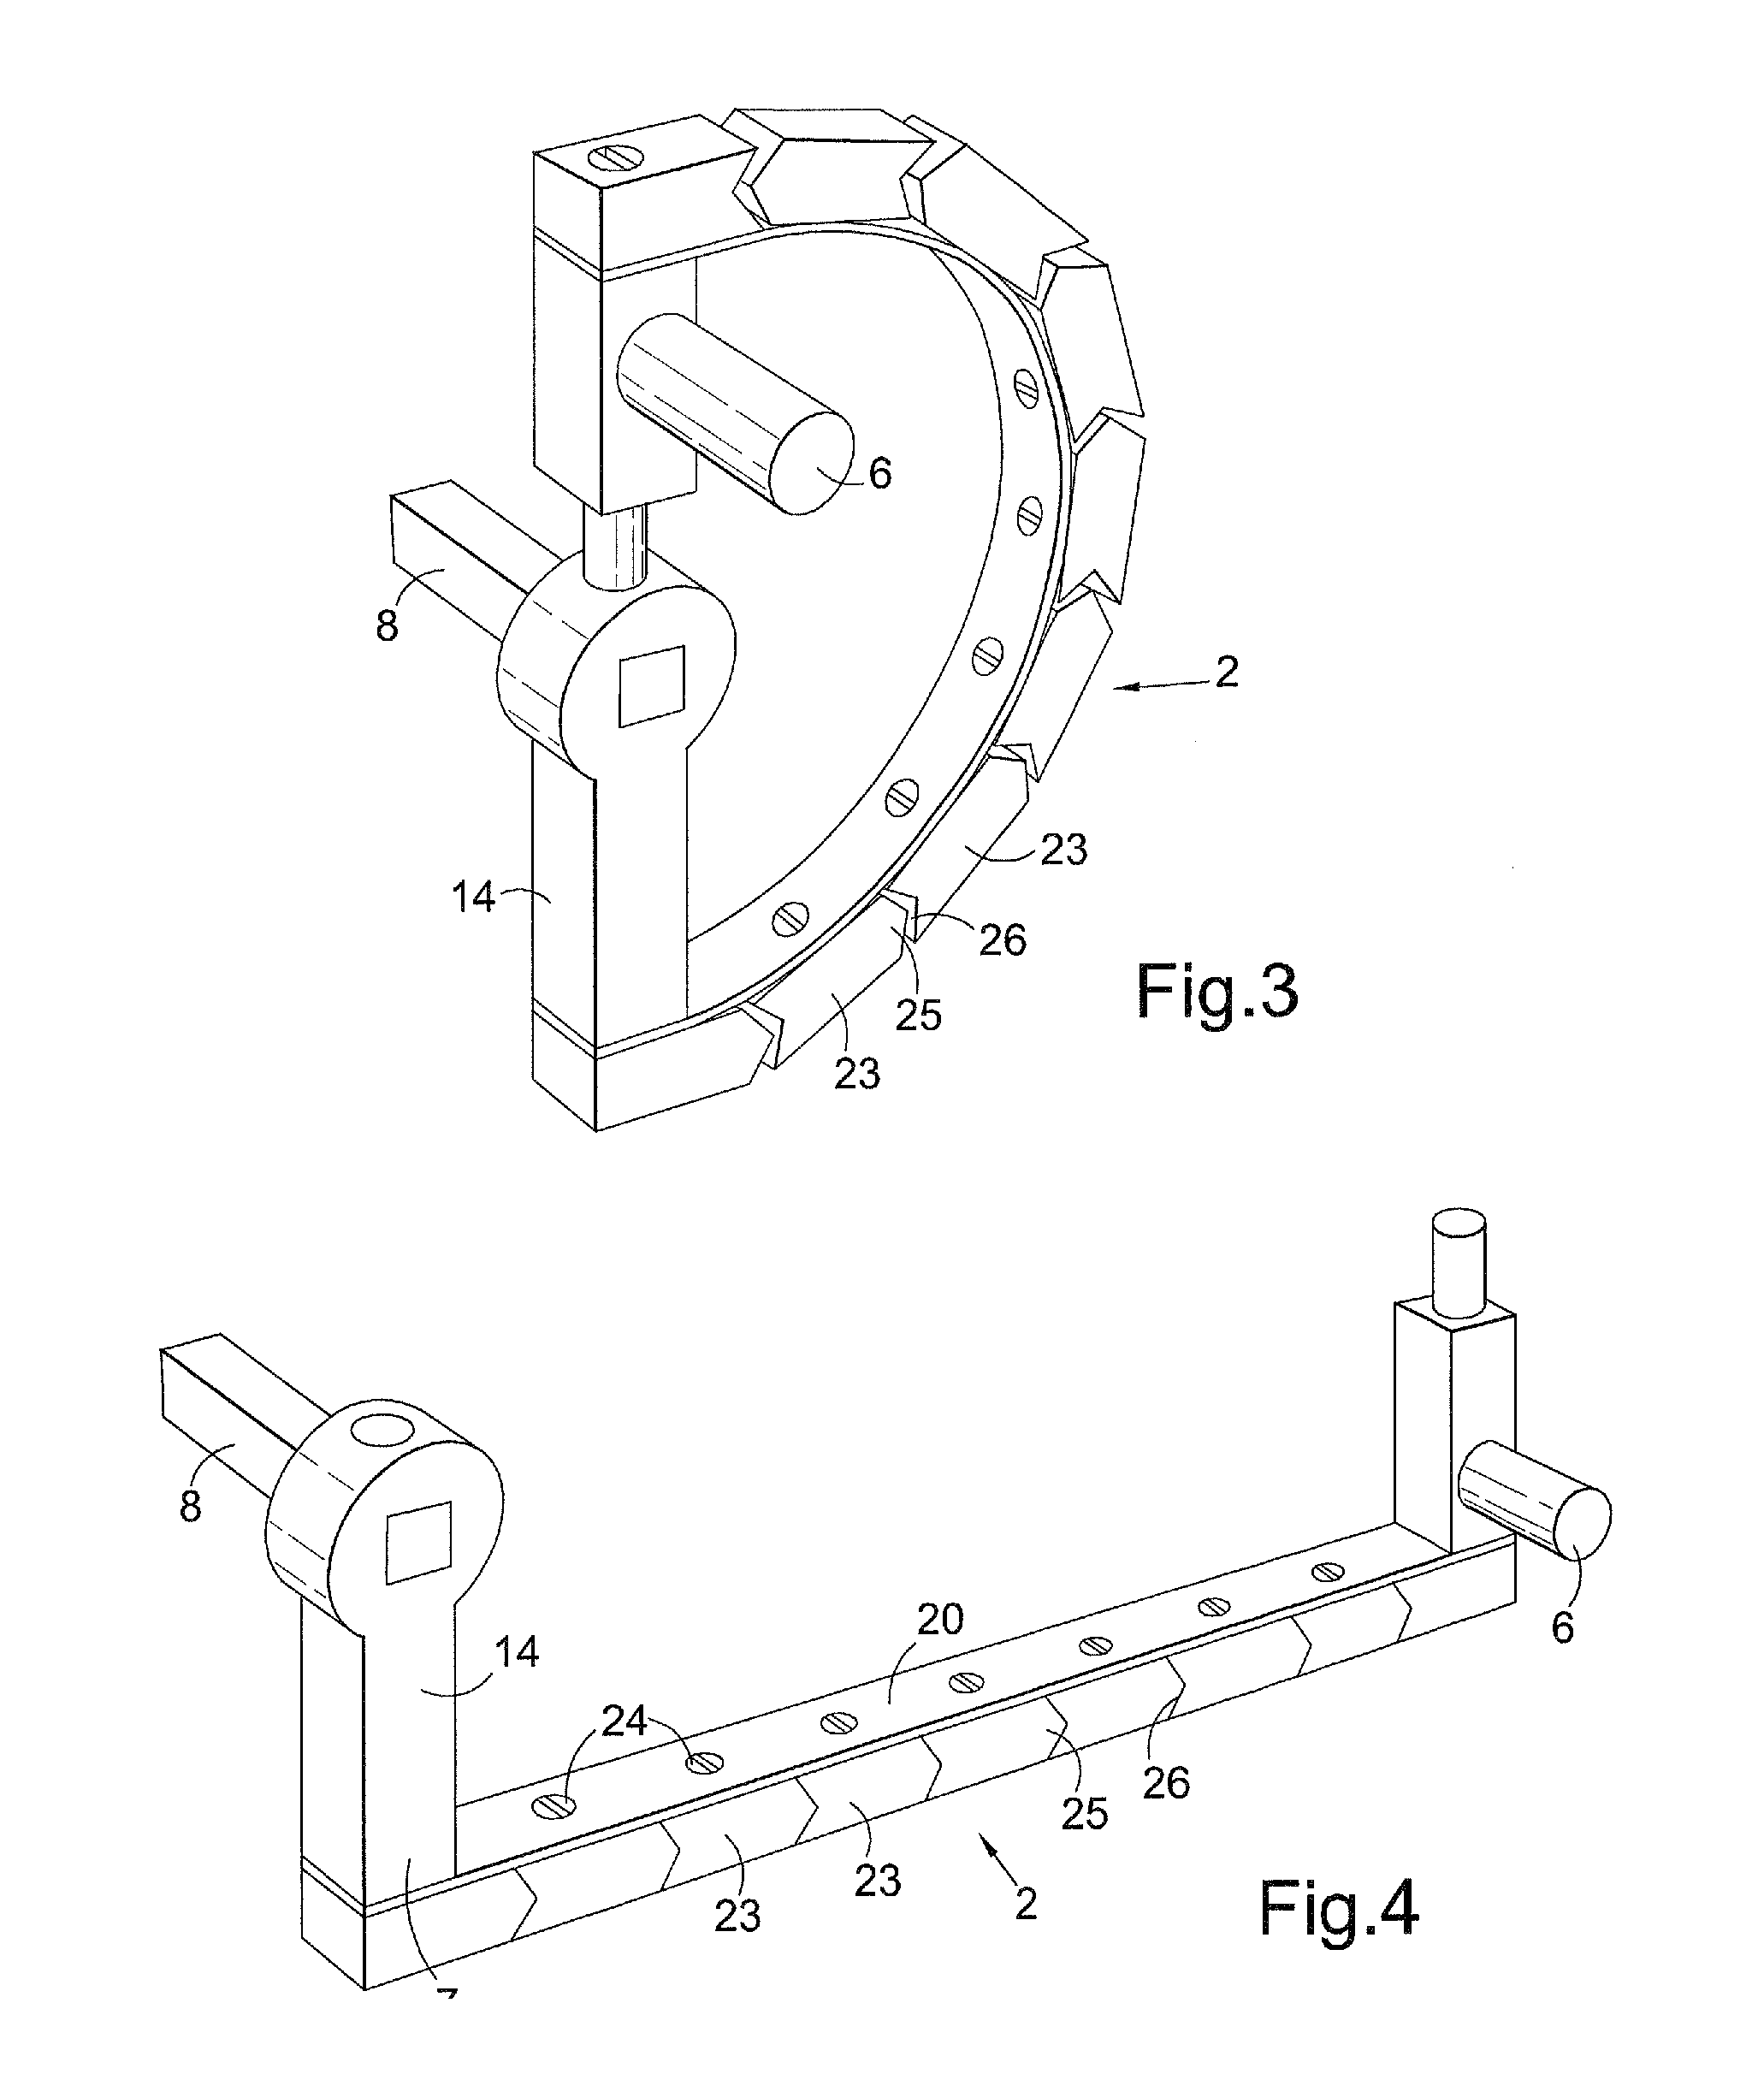 Variable radius lever arm assembly